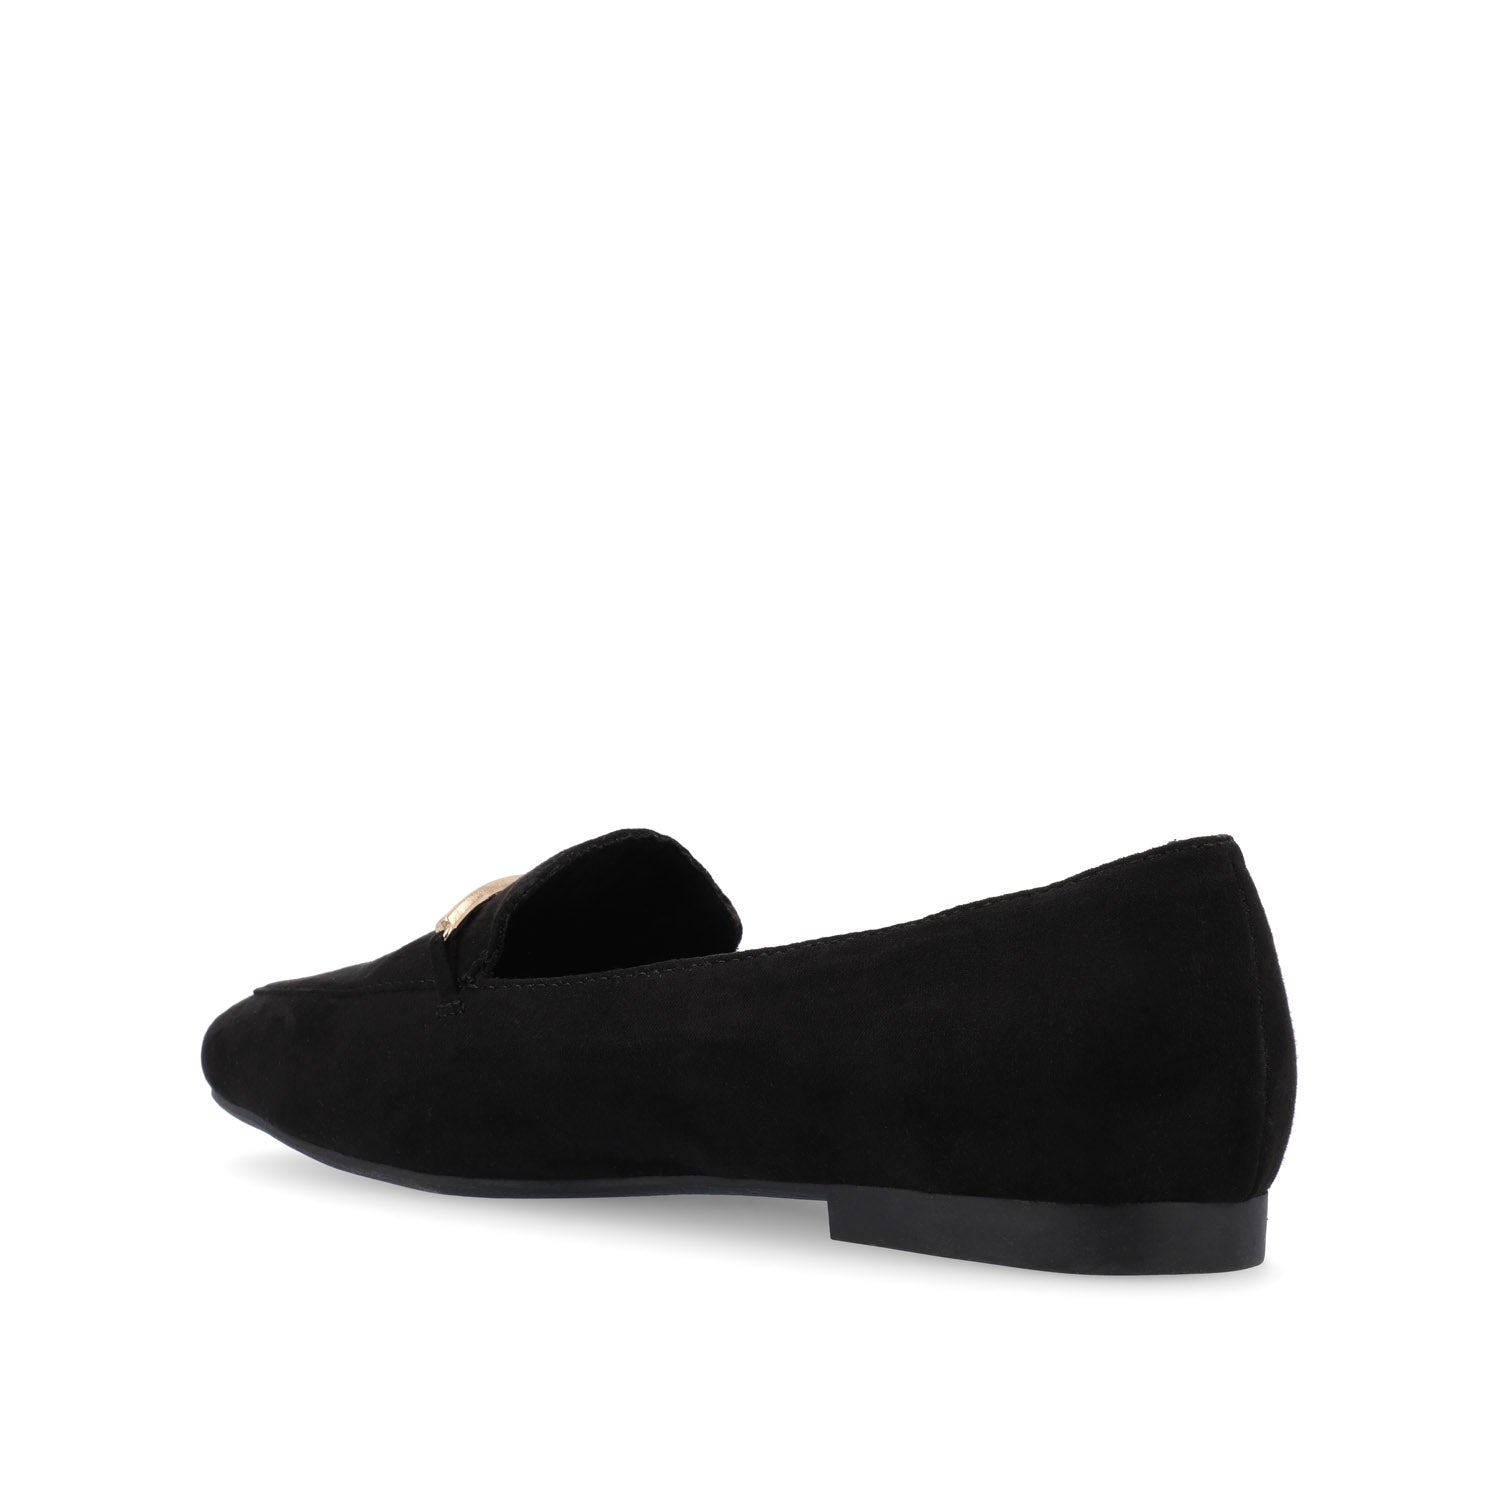 WRENN LOAFER FLATS IN FAUX LEATHER